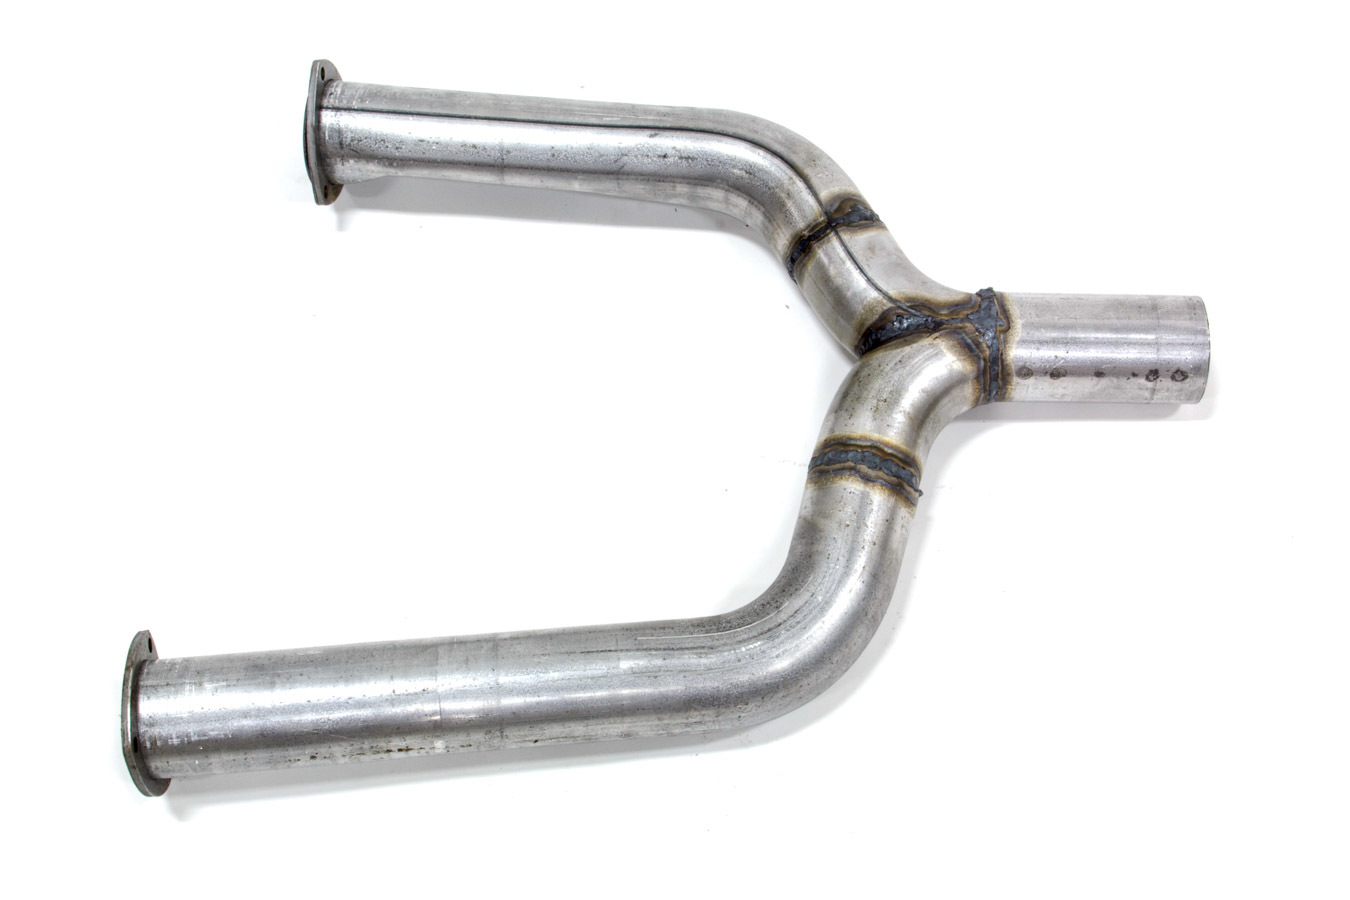 Hooker Headers 16720 Exhaust Y-Pipe, Bolt-On, Steel, Natural, Small Block Chevy, Chevy Corvette 1986-96, Each